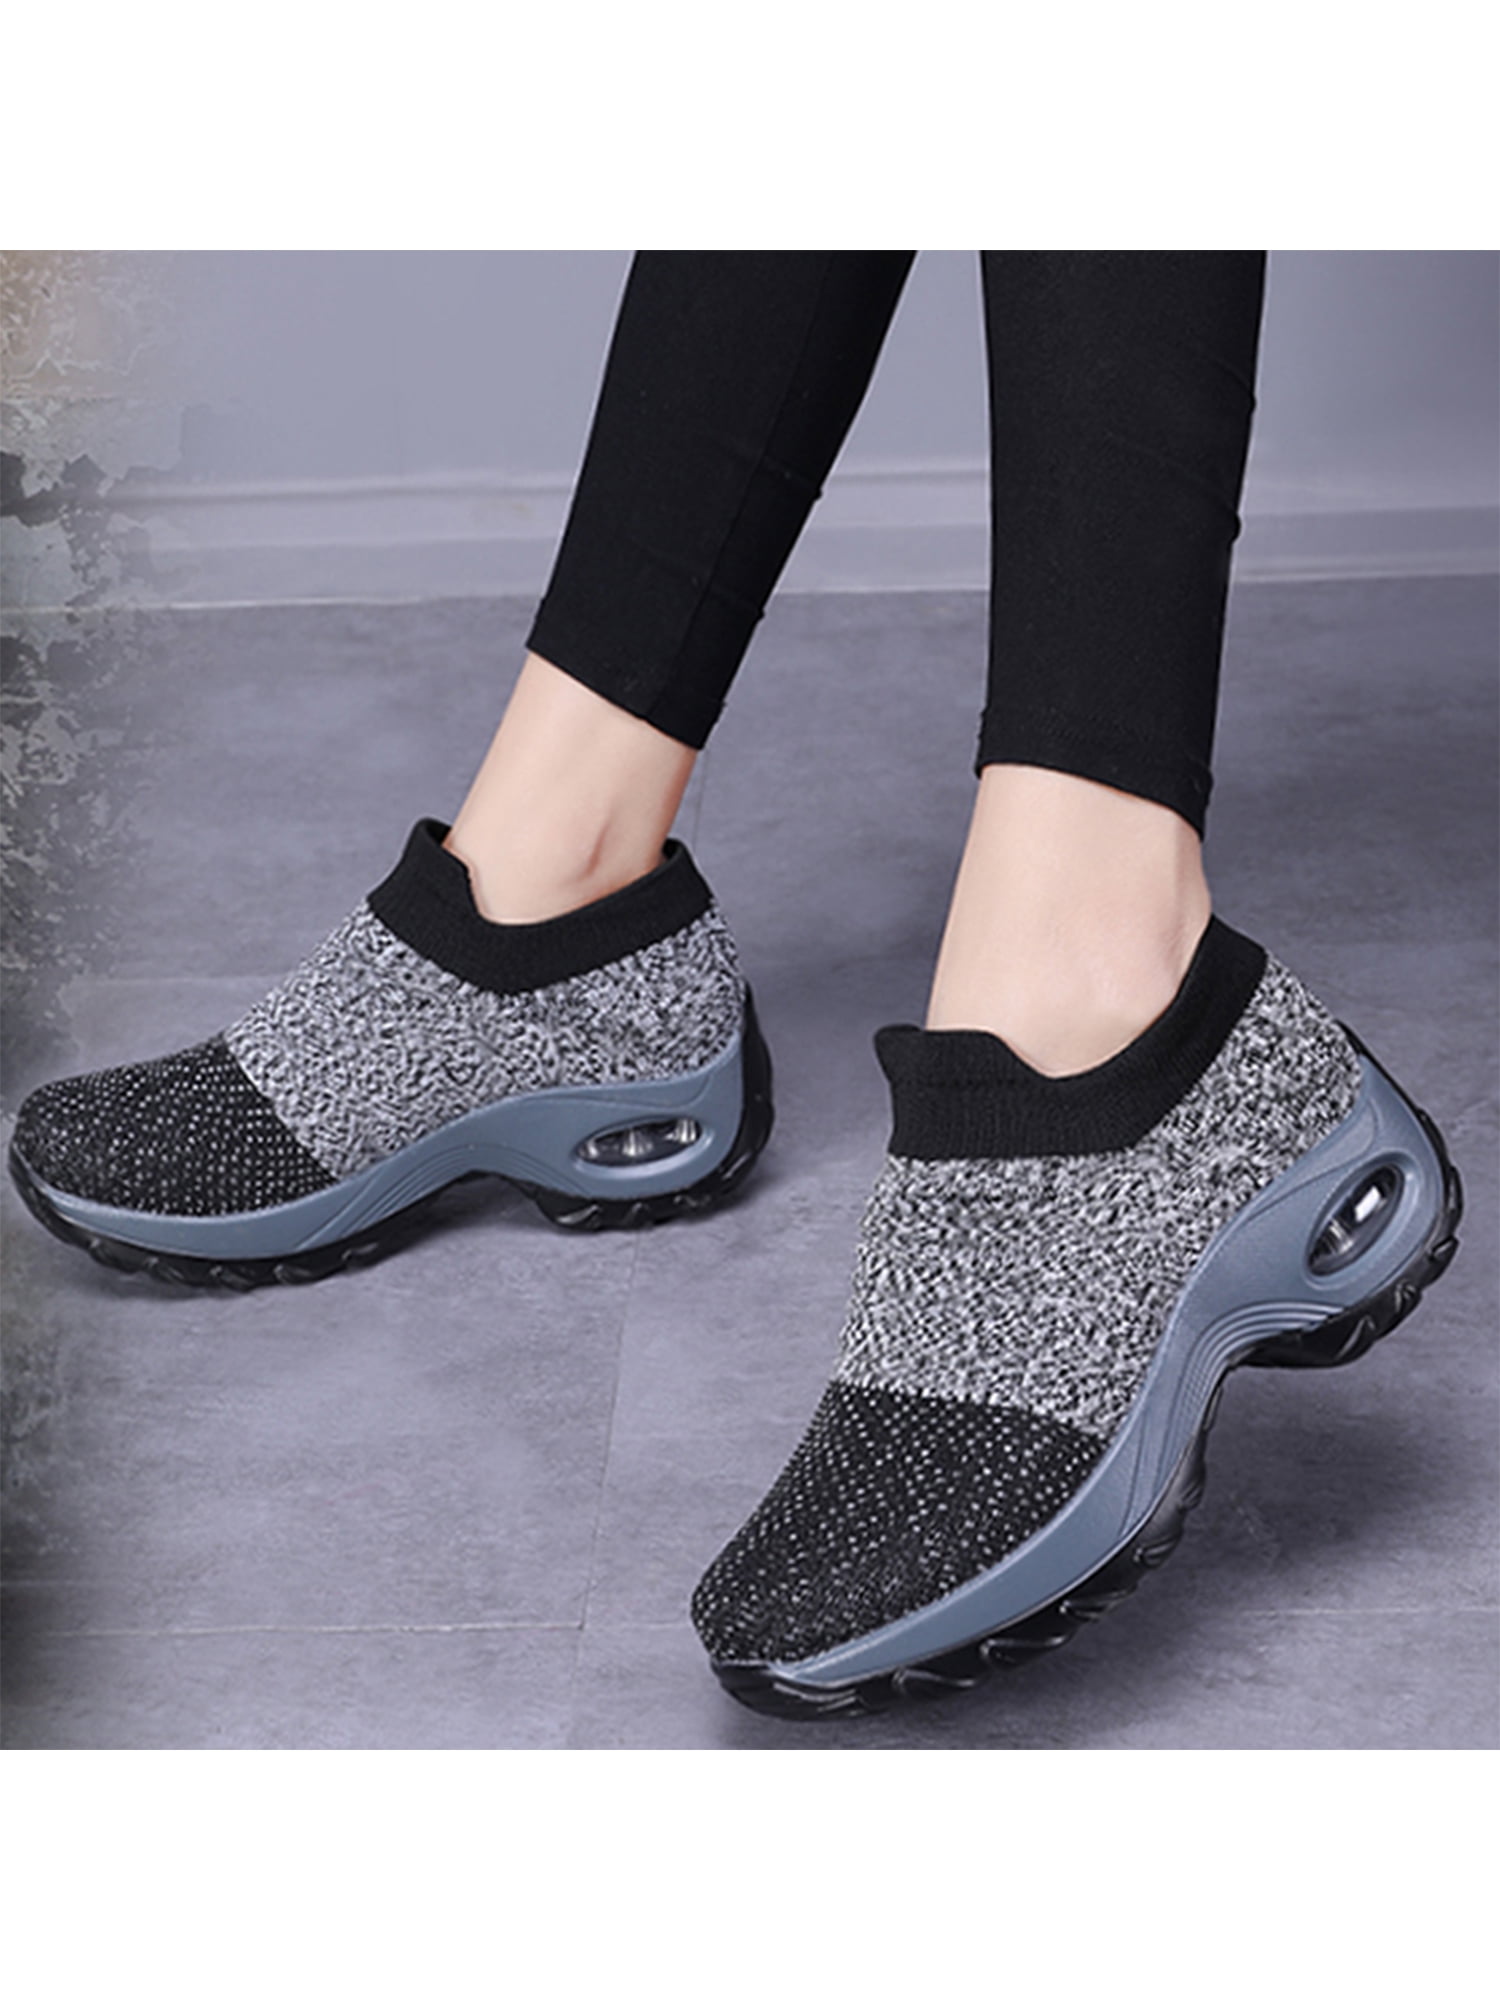 Mesh Air Cushion Platform Fashion Casual Loafers Sock Sneakers Shoes Alibress Women Slip on Walking Shoes